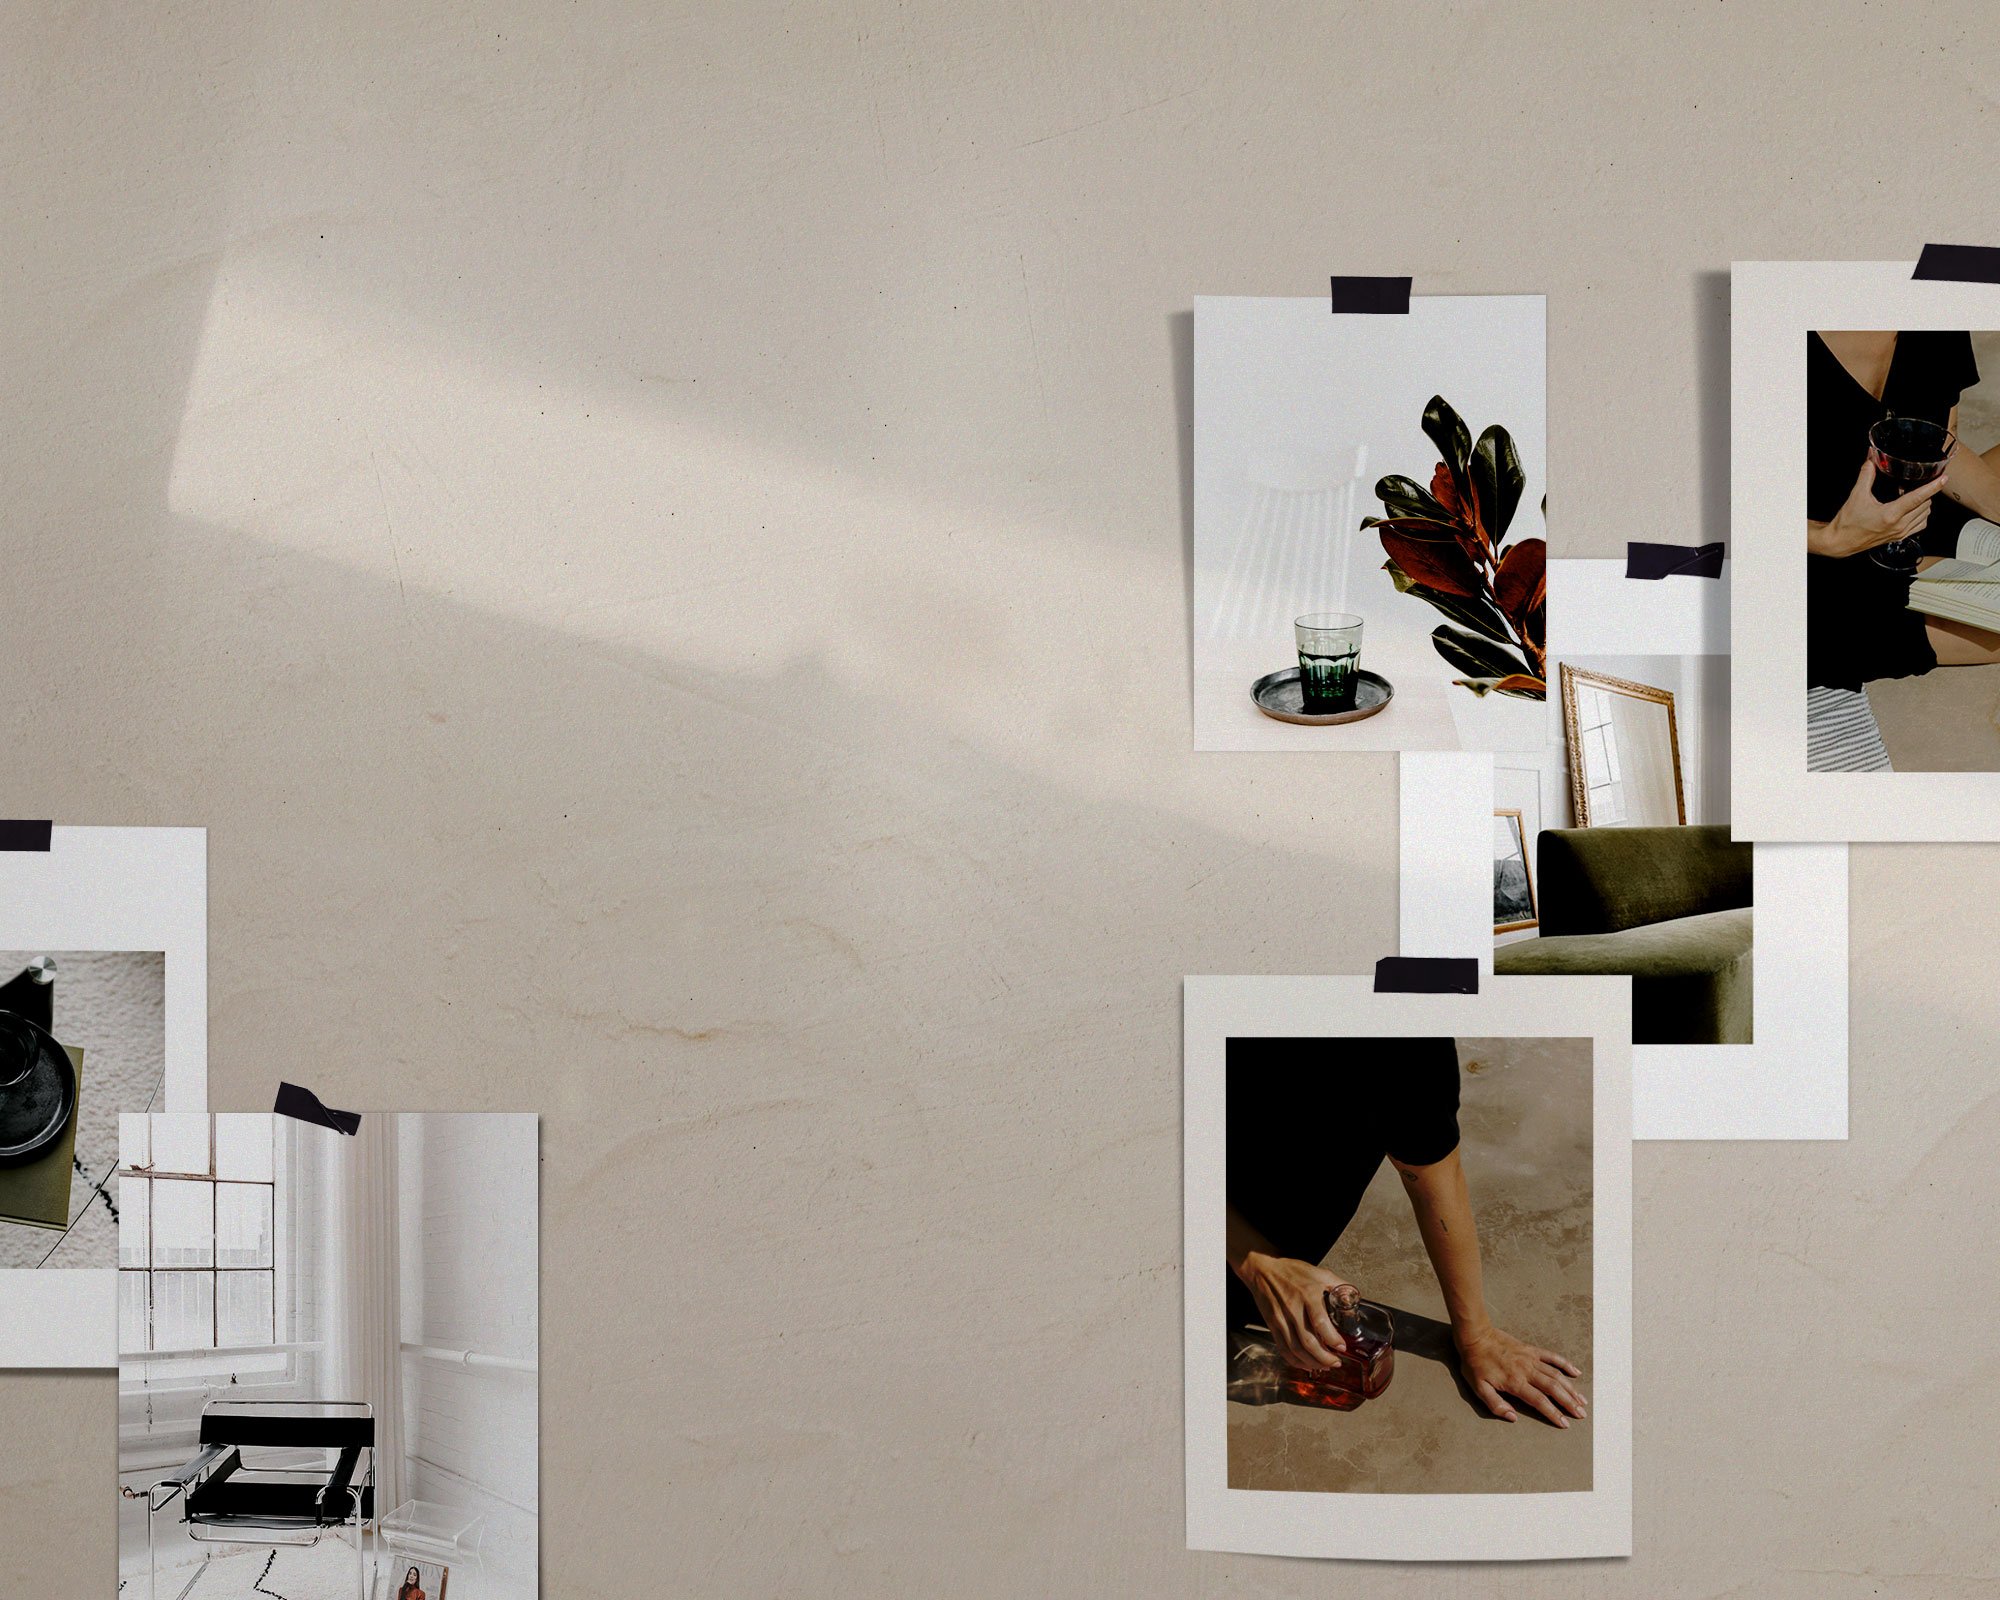 Mood board images on a wall